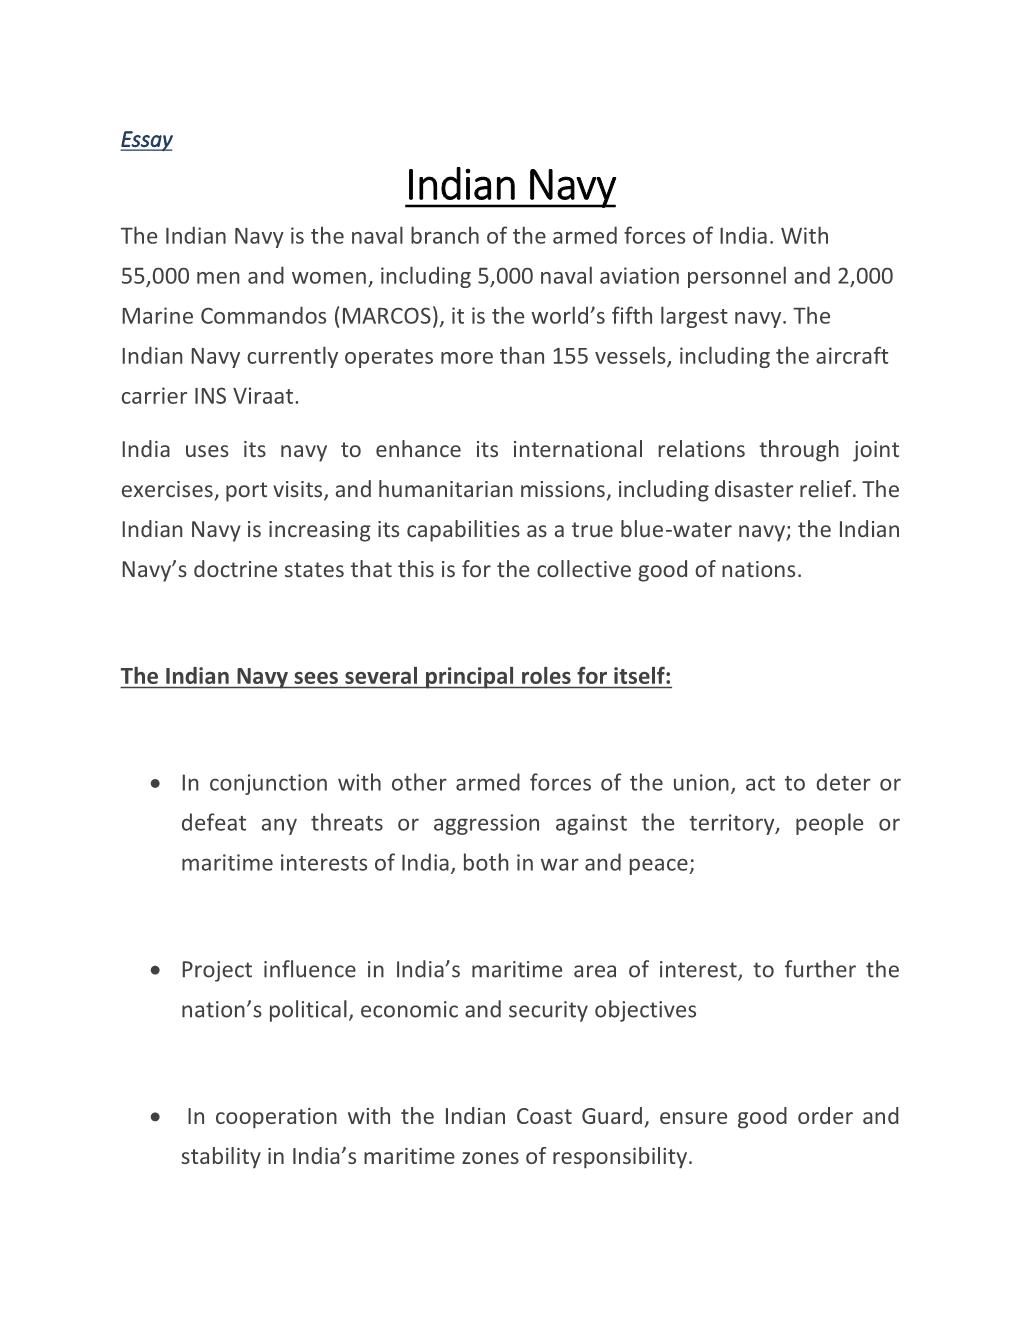 Indian Navy the Indian Navy Is the Naval Branch of the Armed Forces of India